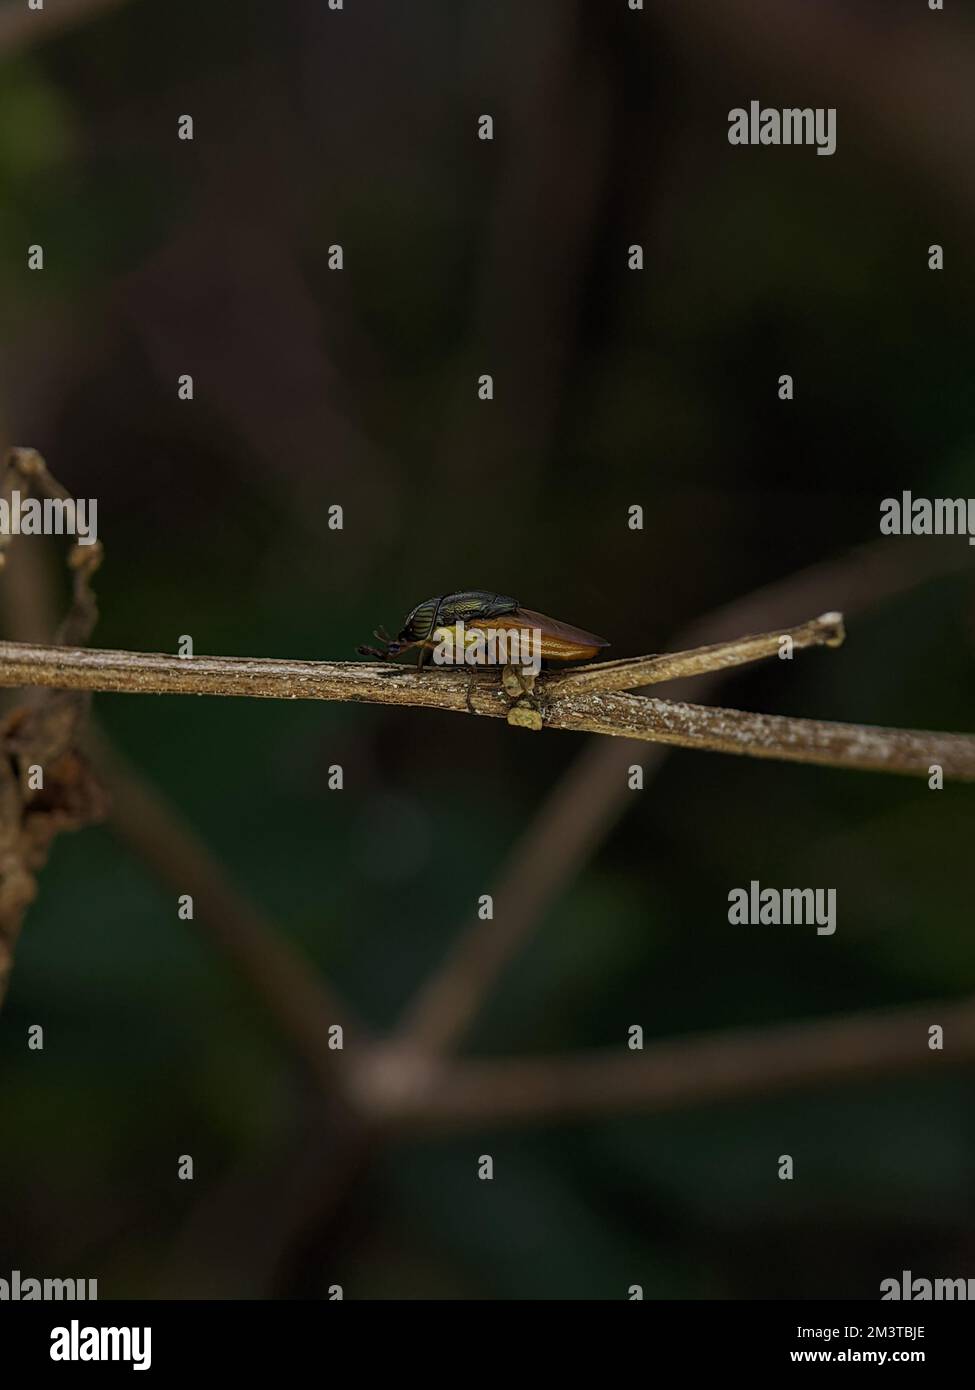 A closeup of a fly (Stomorhina lunata) on a wooden branch with blurred background Stock Photo